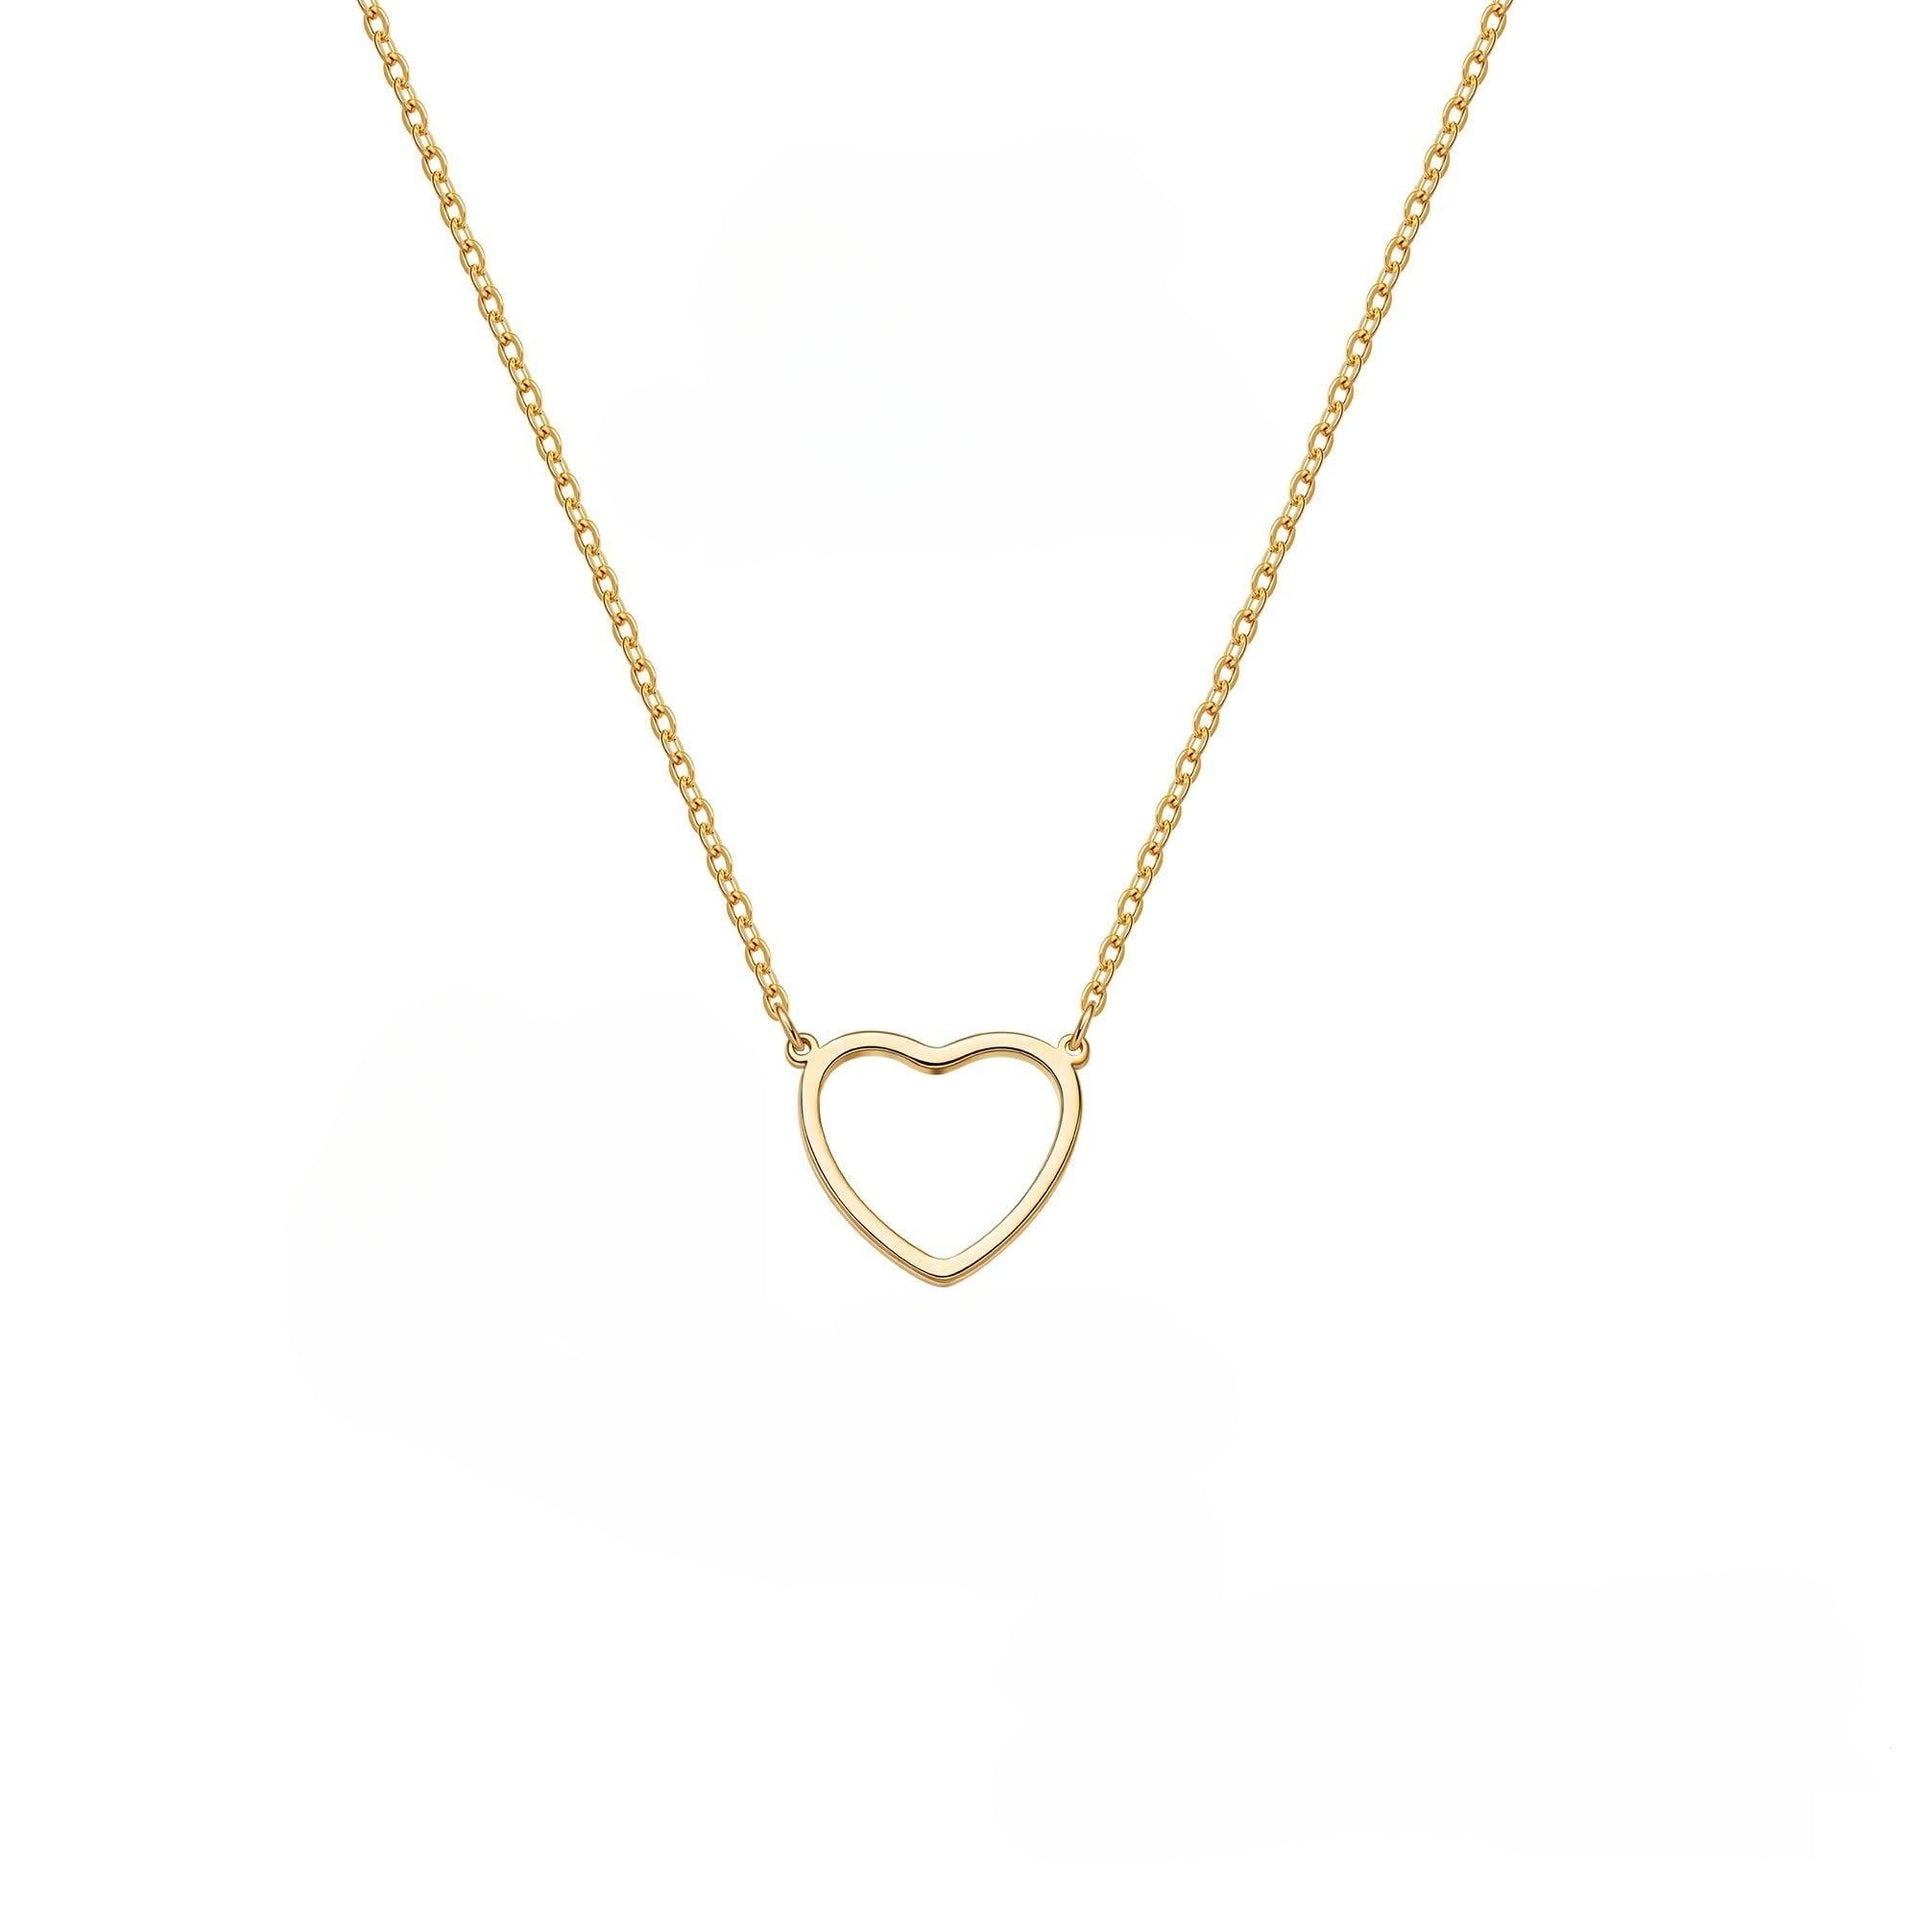 Cute Heart Necklace Tiny 14k Gold Heart Pendant Choker Necklaces Small Gold  Love Open Heart Chain Necklace for Women Dainty Gold Necklace